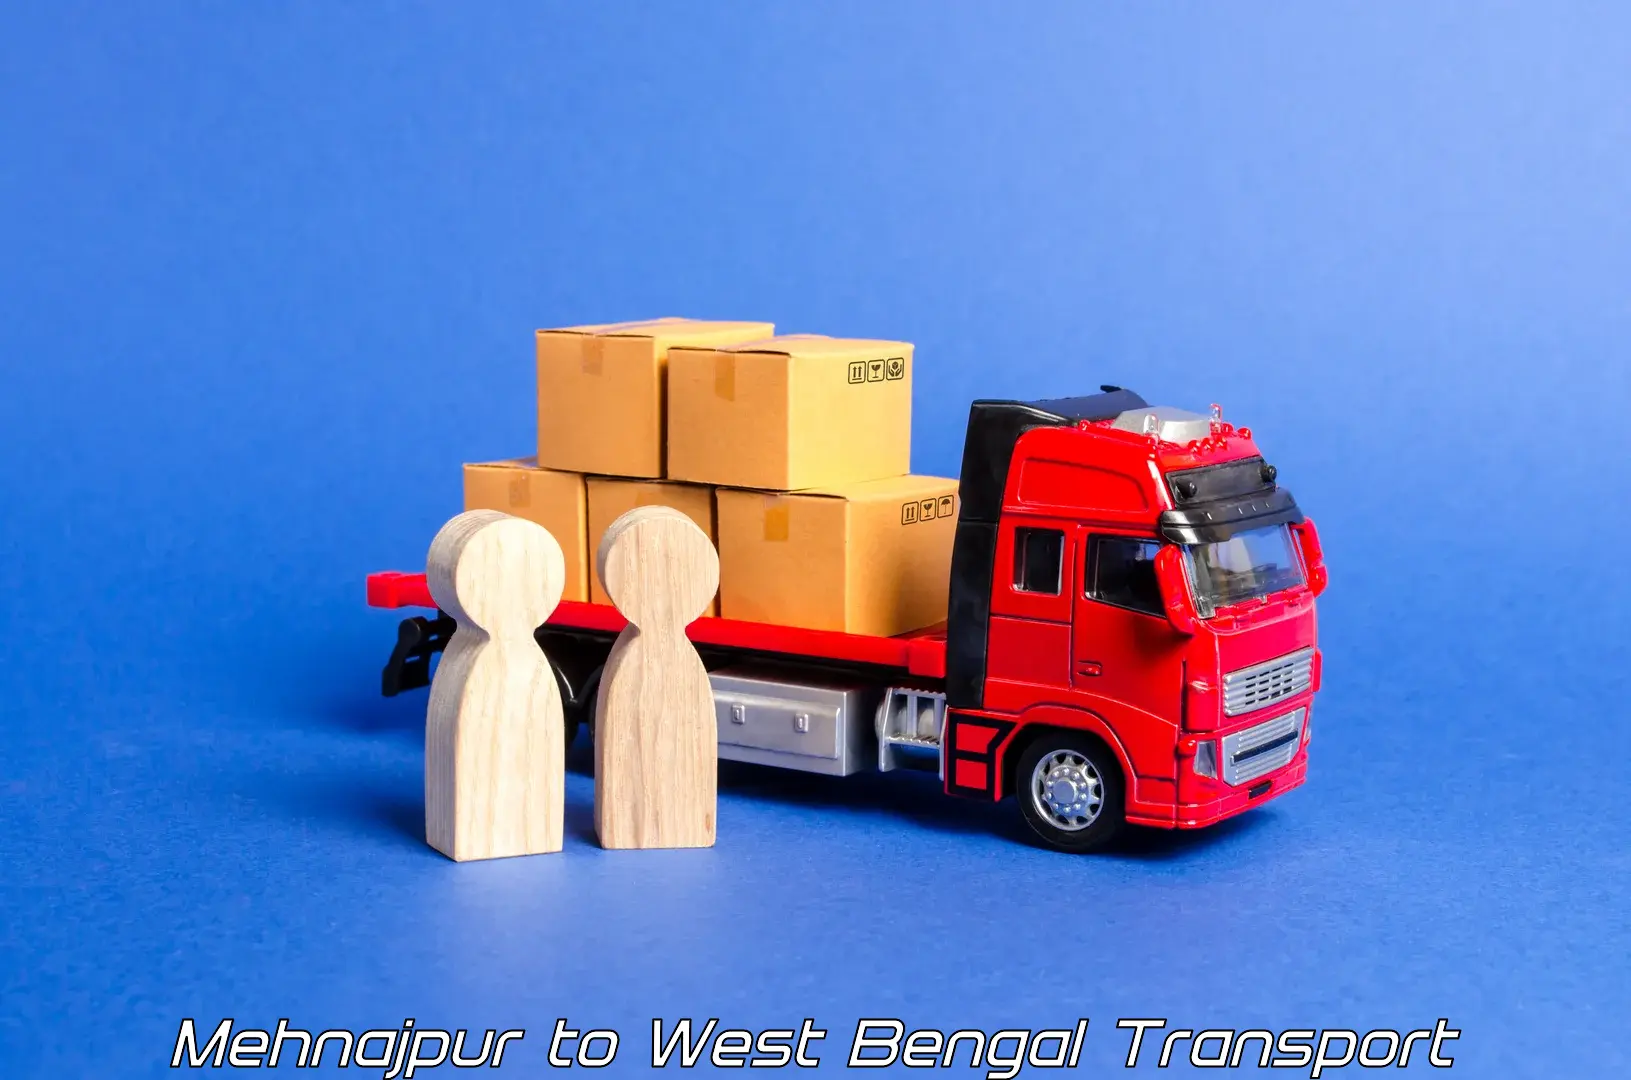 Commercial transport service Mehnajpur to Budge Budge